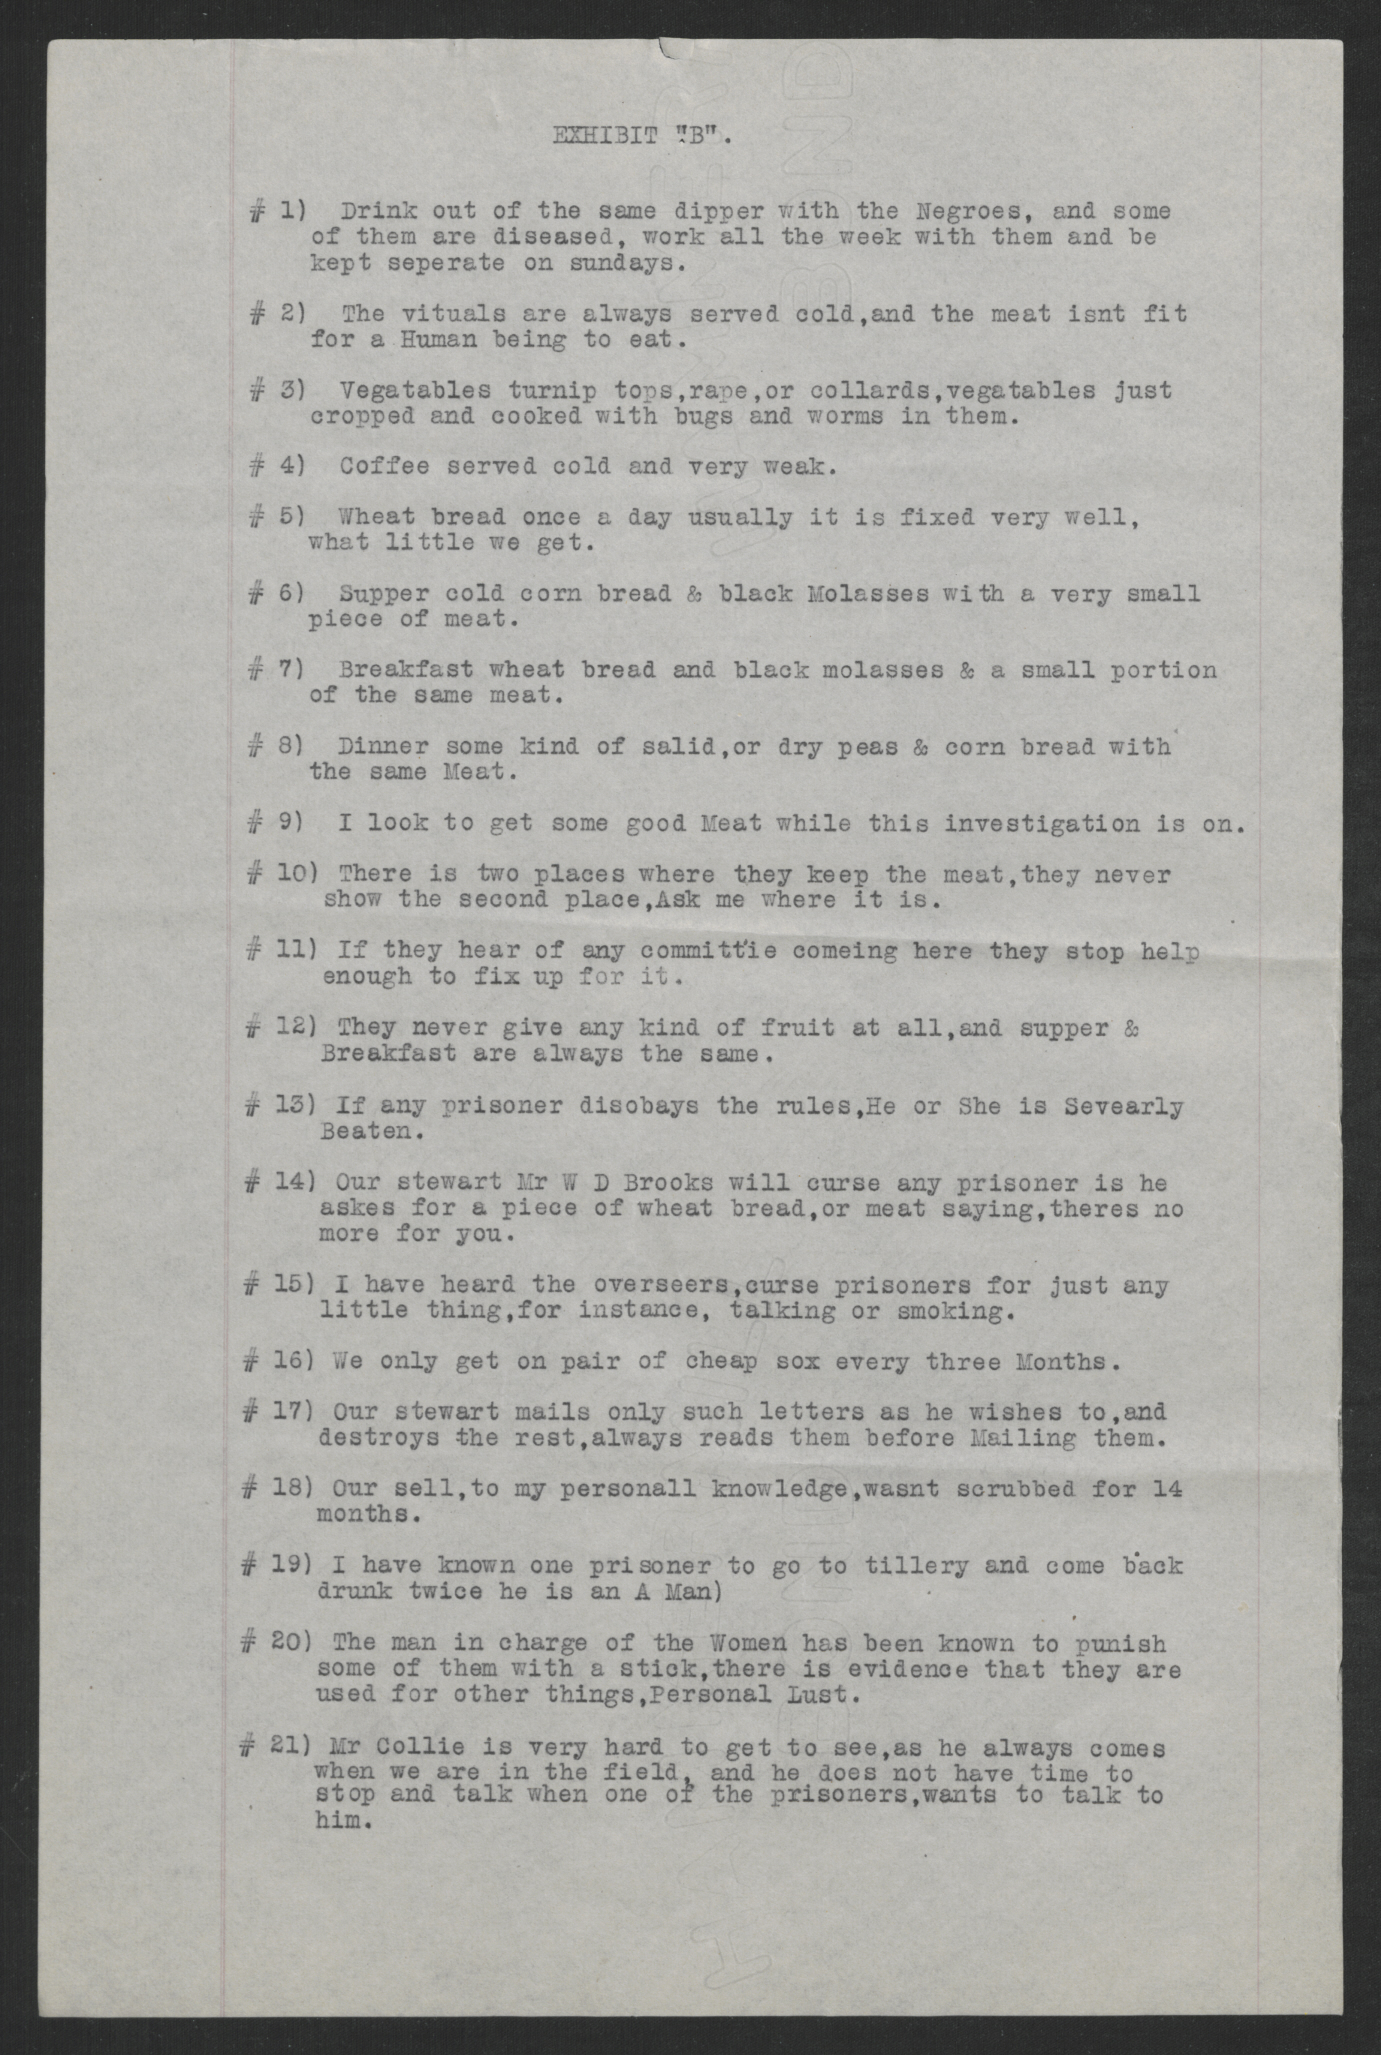 Exhibit B in the Investigation of the Charges Made by Inmates of the State Prison Farm to Earl E. Dudding, 12 May 1919, page 1